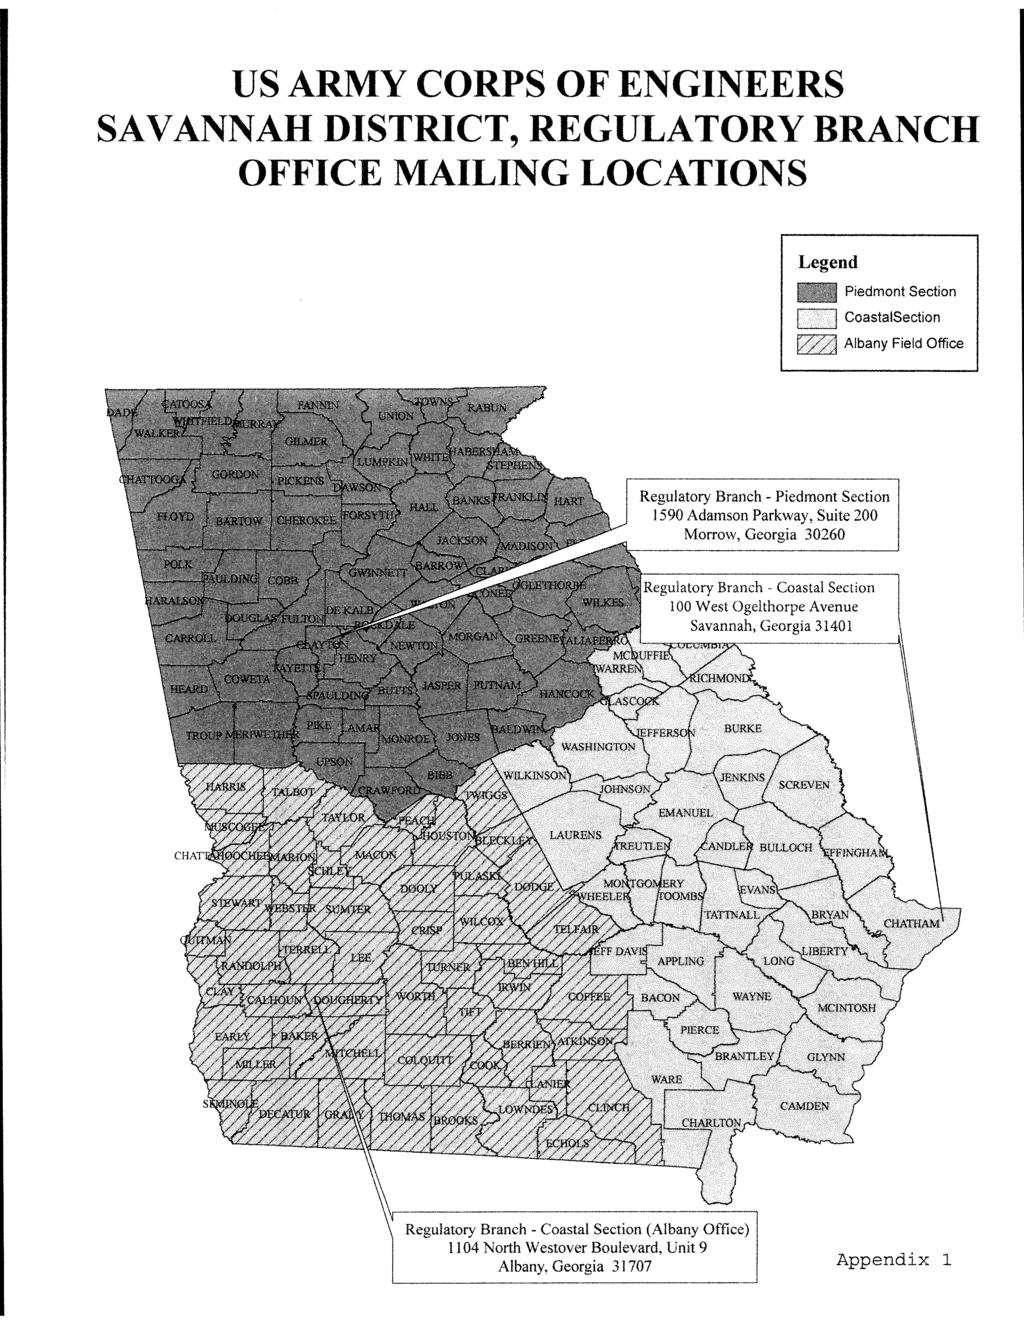 US ARMY CORPS OF ENGINEERS SAVANNAH DISTRICT, REGULATORY BRANCH OFFICE MAILING LOCATIONS Legend Piedmont Section [:=J CoastalSection ~ Albany Field Office Regulatory Branch - Piedmont Section 1590